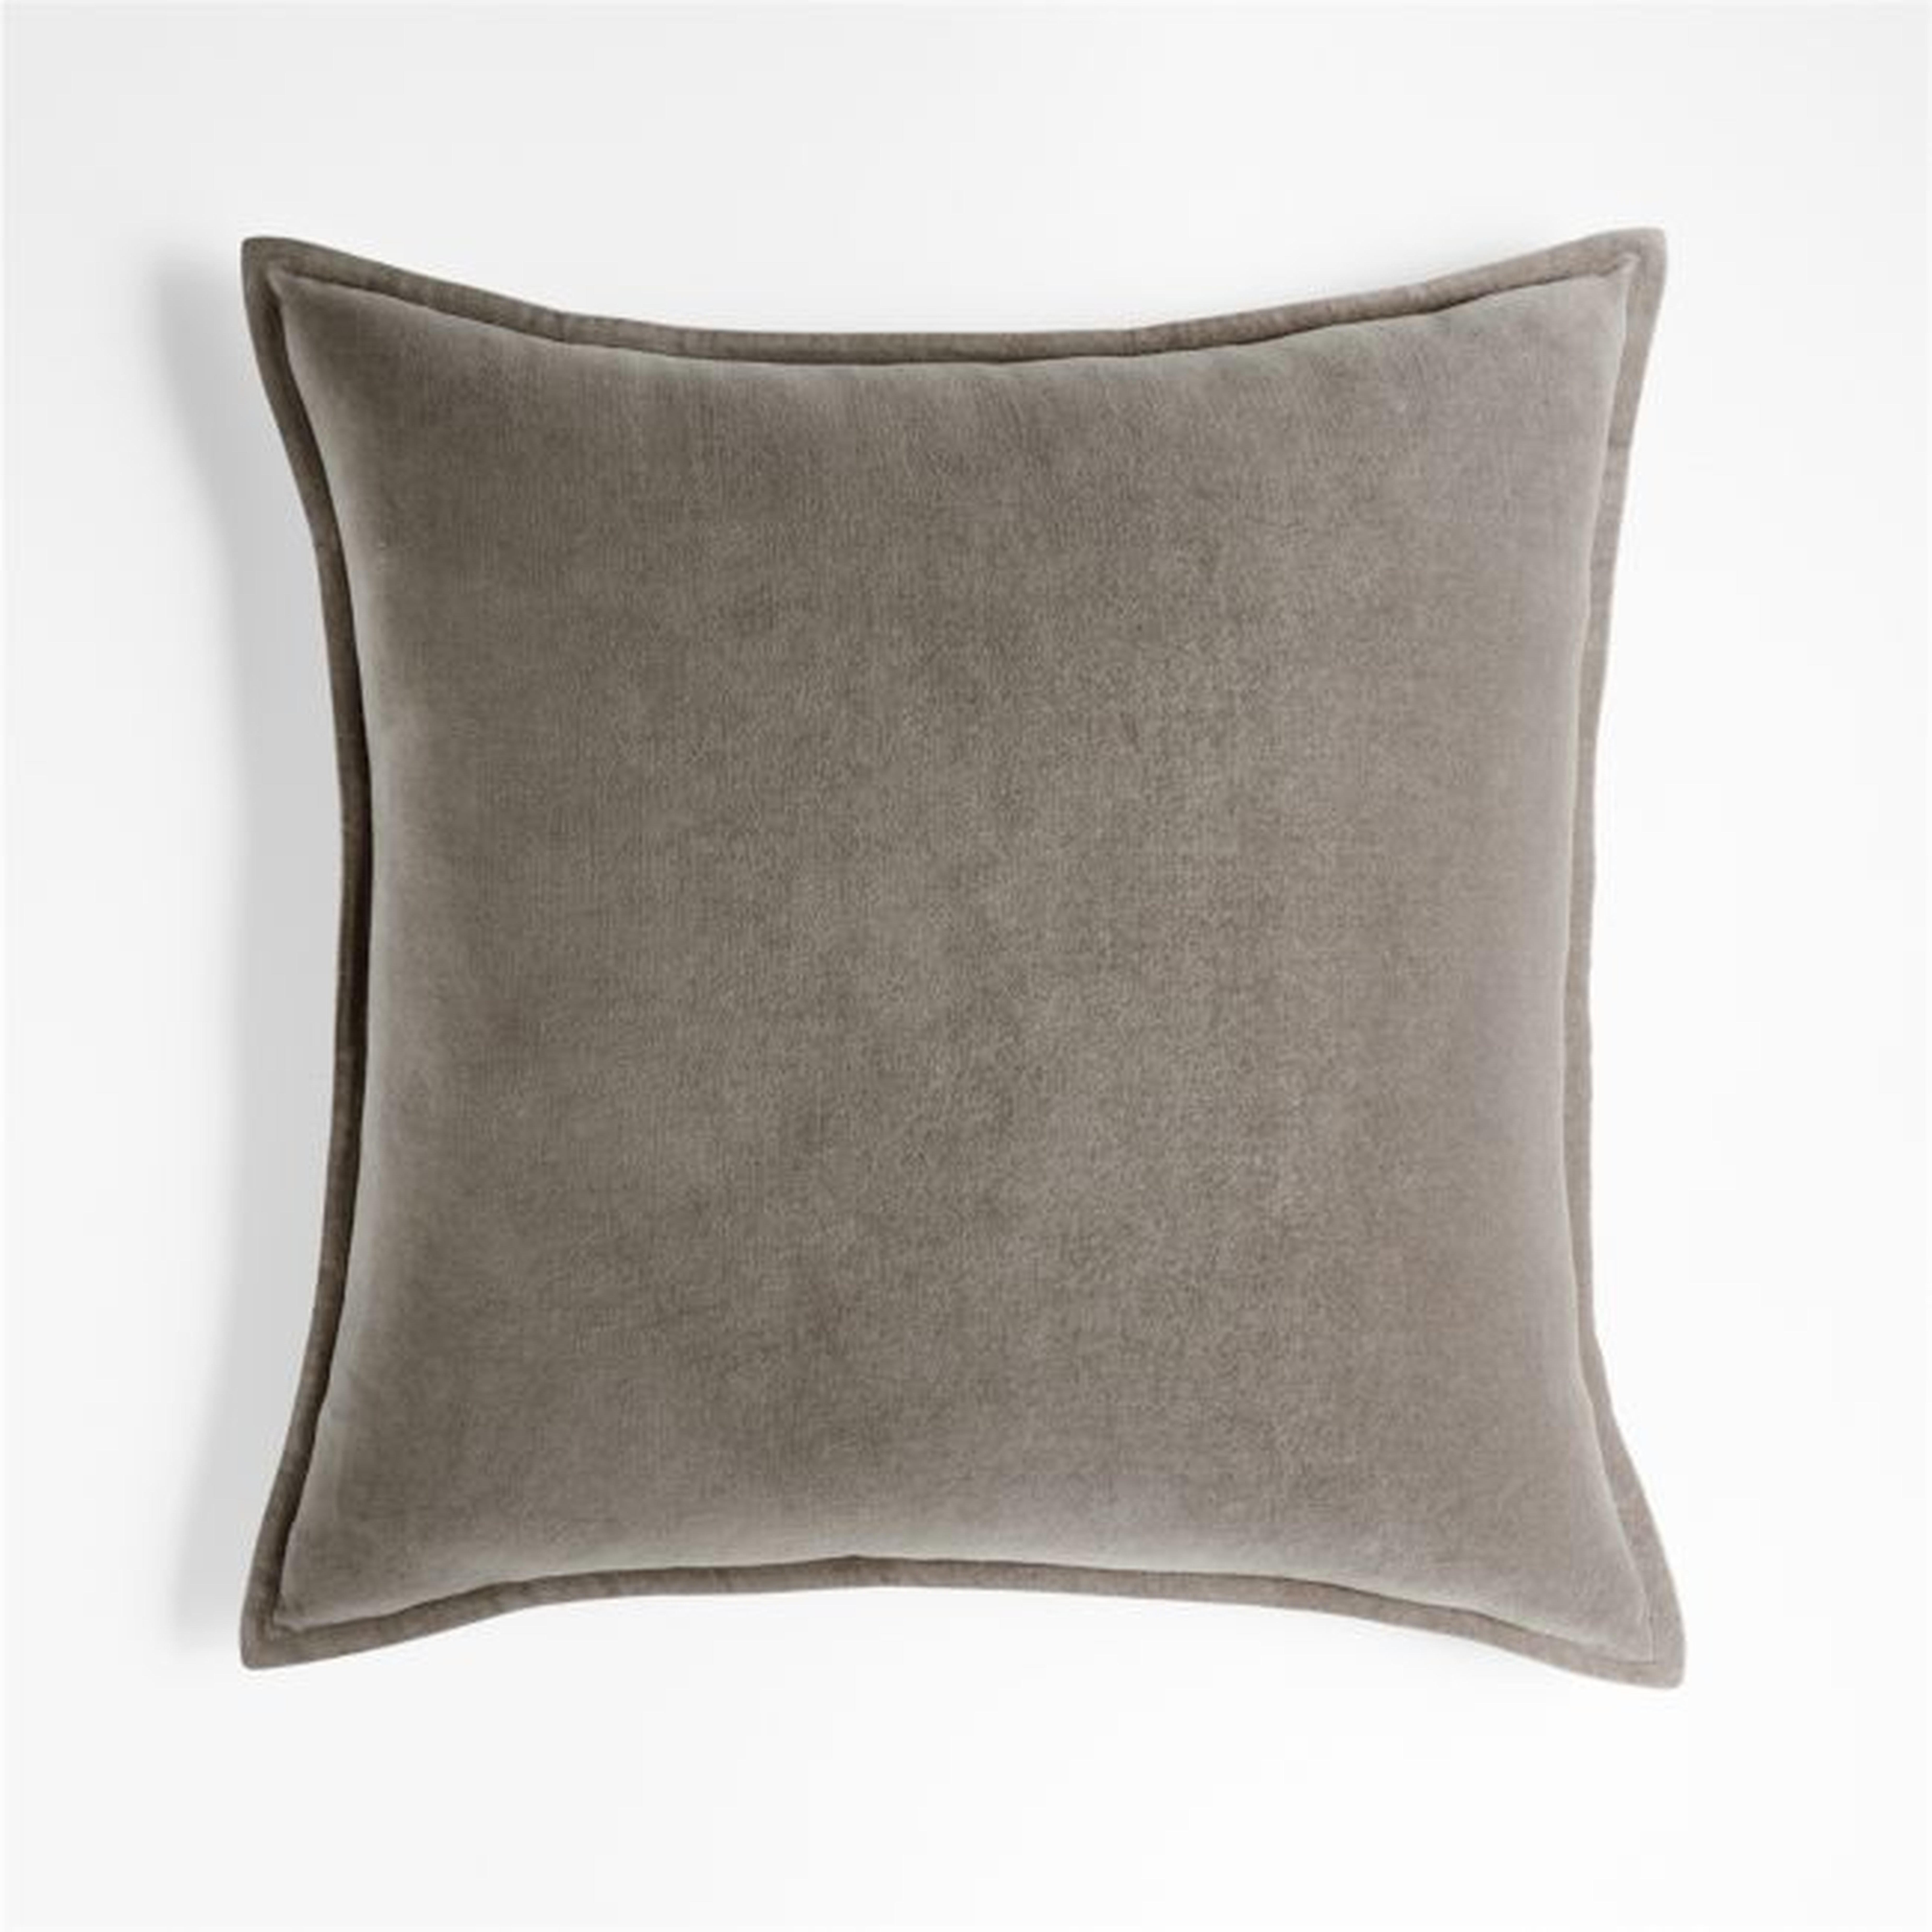 Frost 20"x20" Washed Cotton Velvet Throw Pillow with Down-Alternative Insert - Crate and Barrel